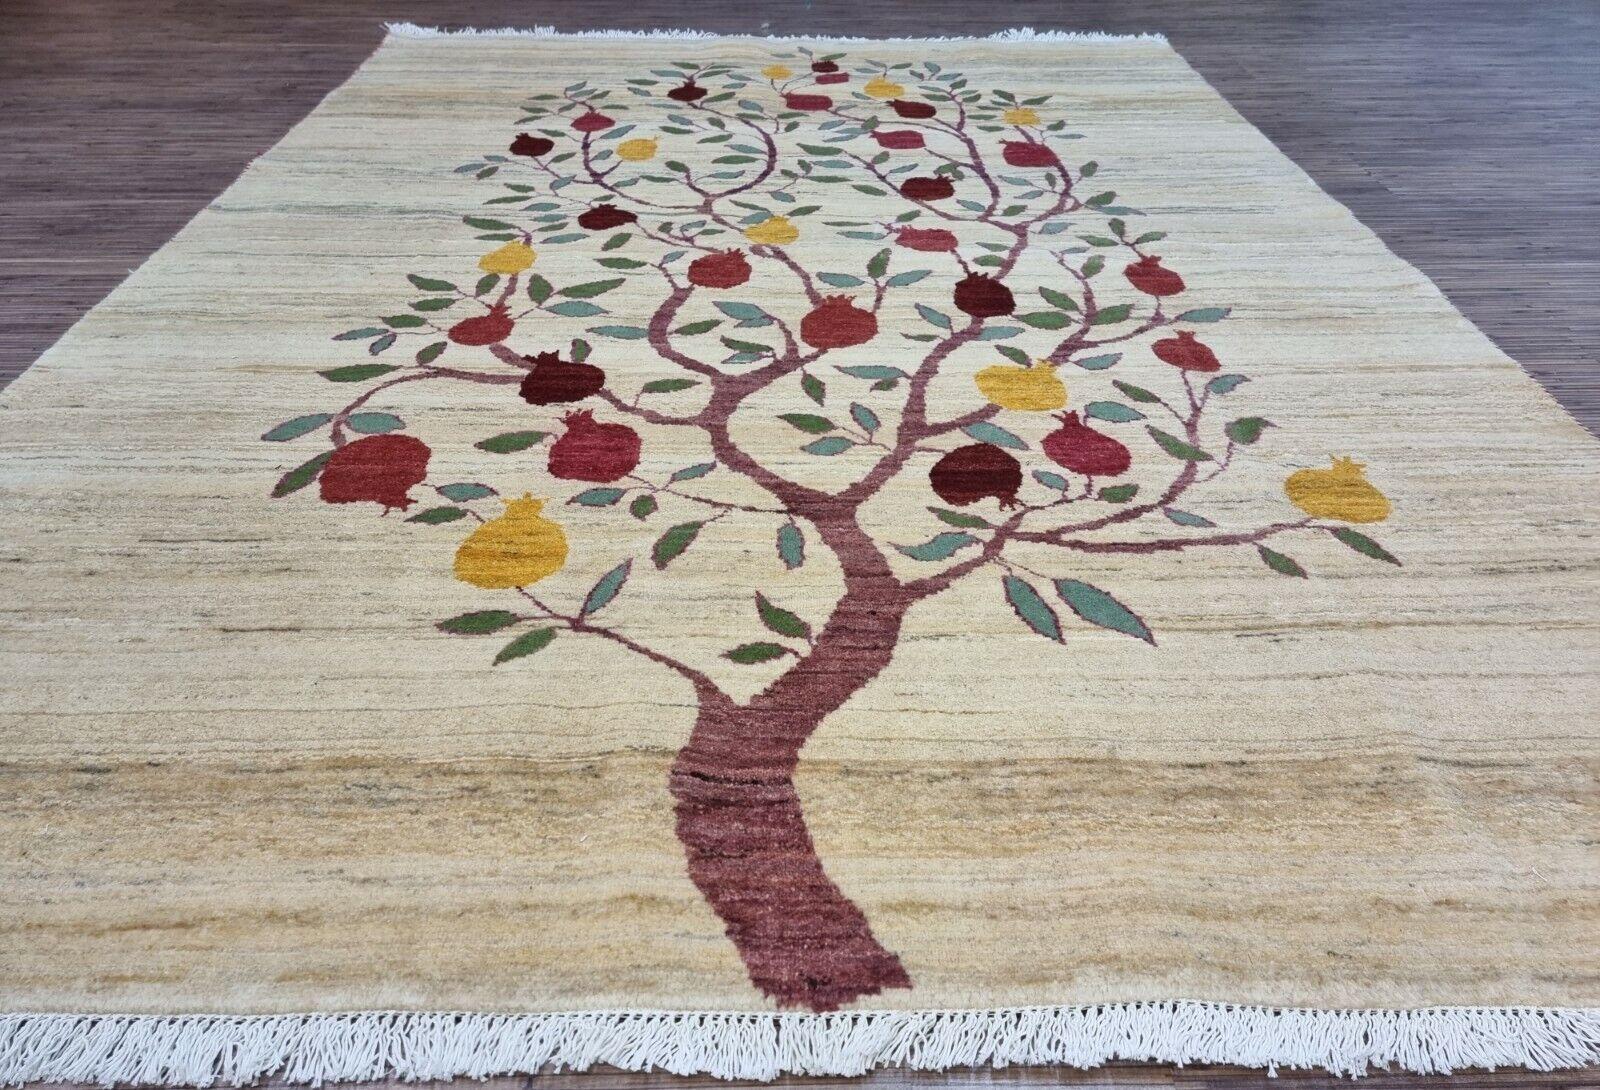 Hand-Knotted Handmade Vintage Persian Style Gabbeh Rug 4.7' x 6.4', 1970s - 1D82 For Sale